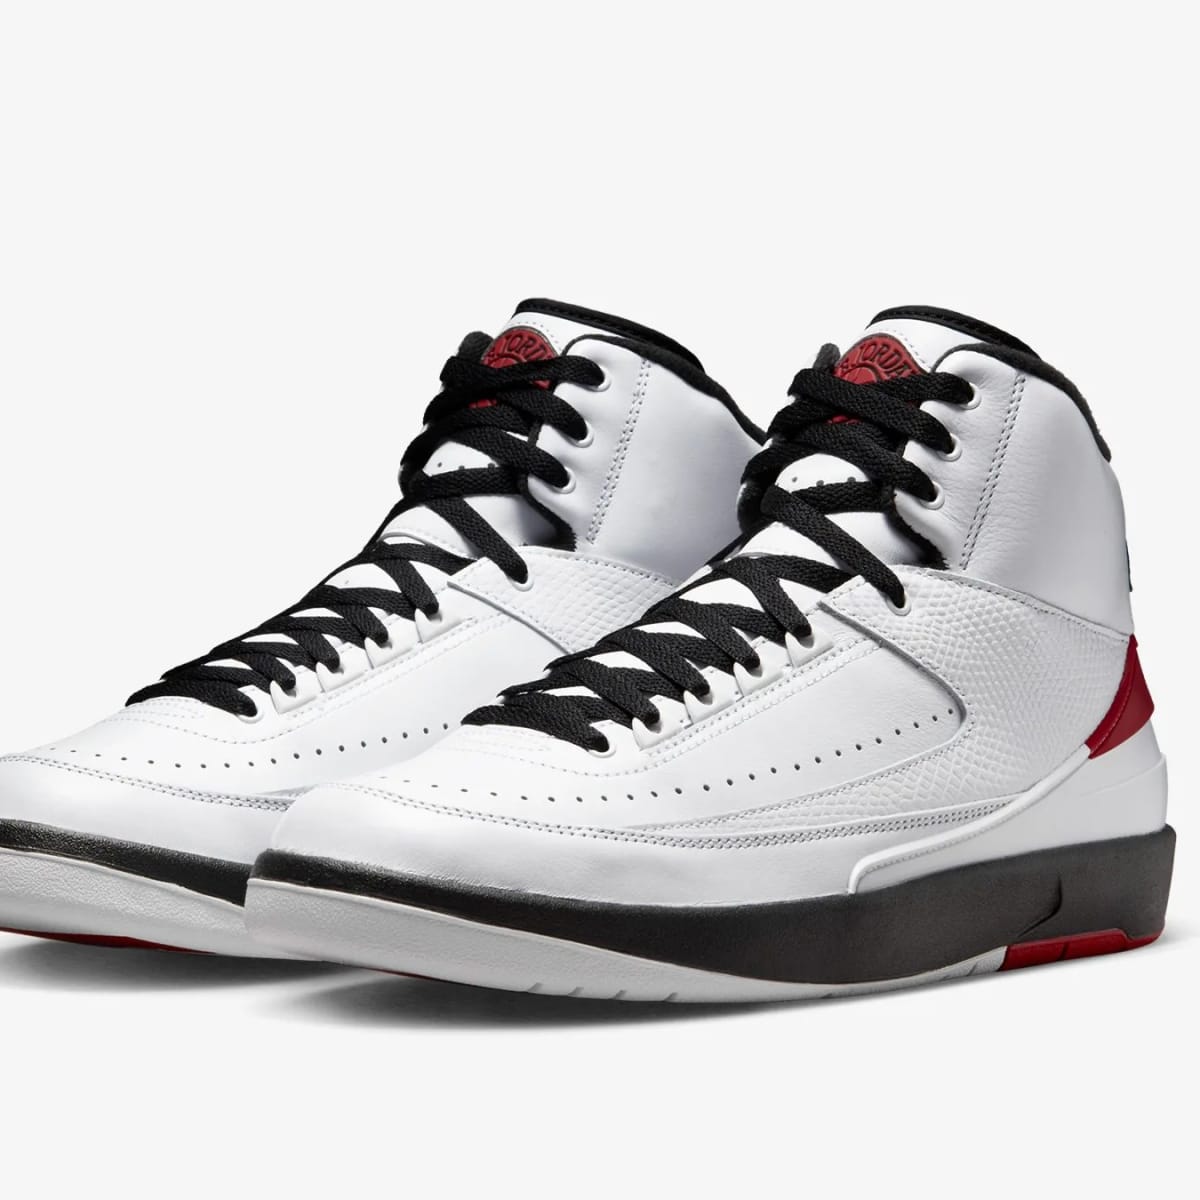 How to Buy the Air Jordan 2 'Chicago' - Sports Illustrated